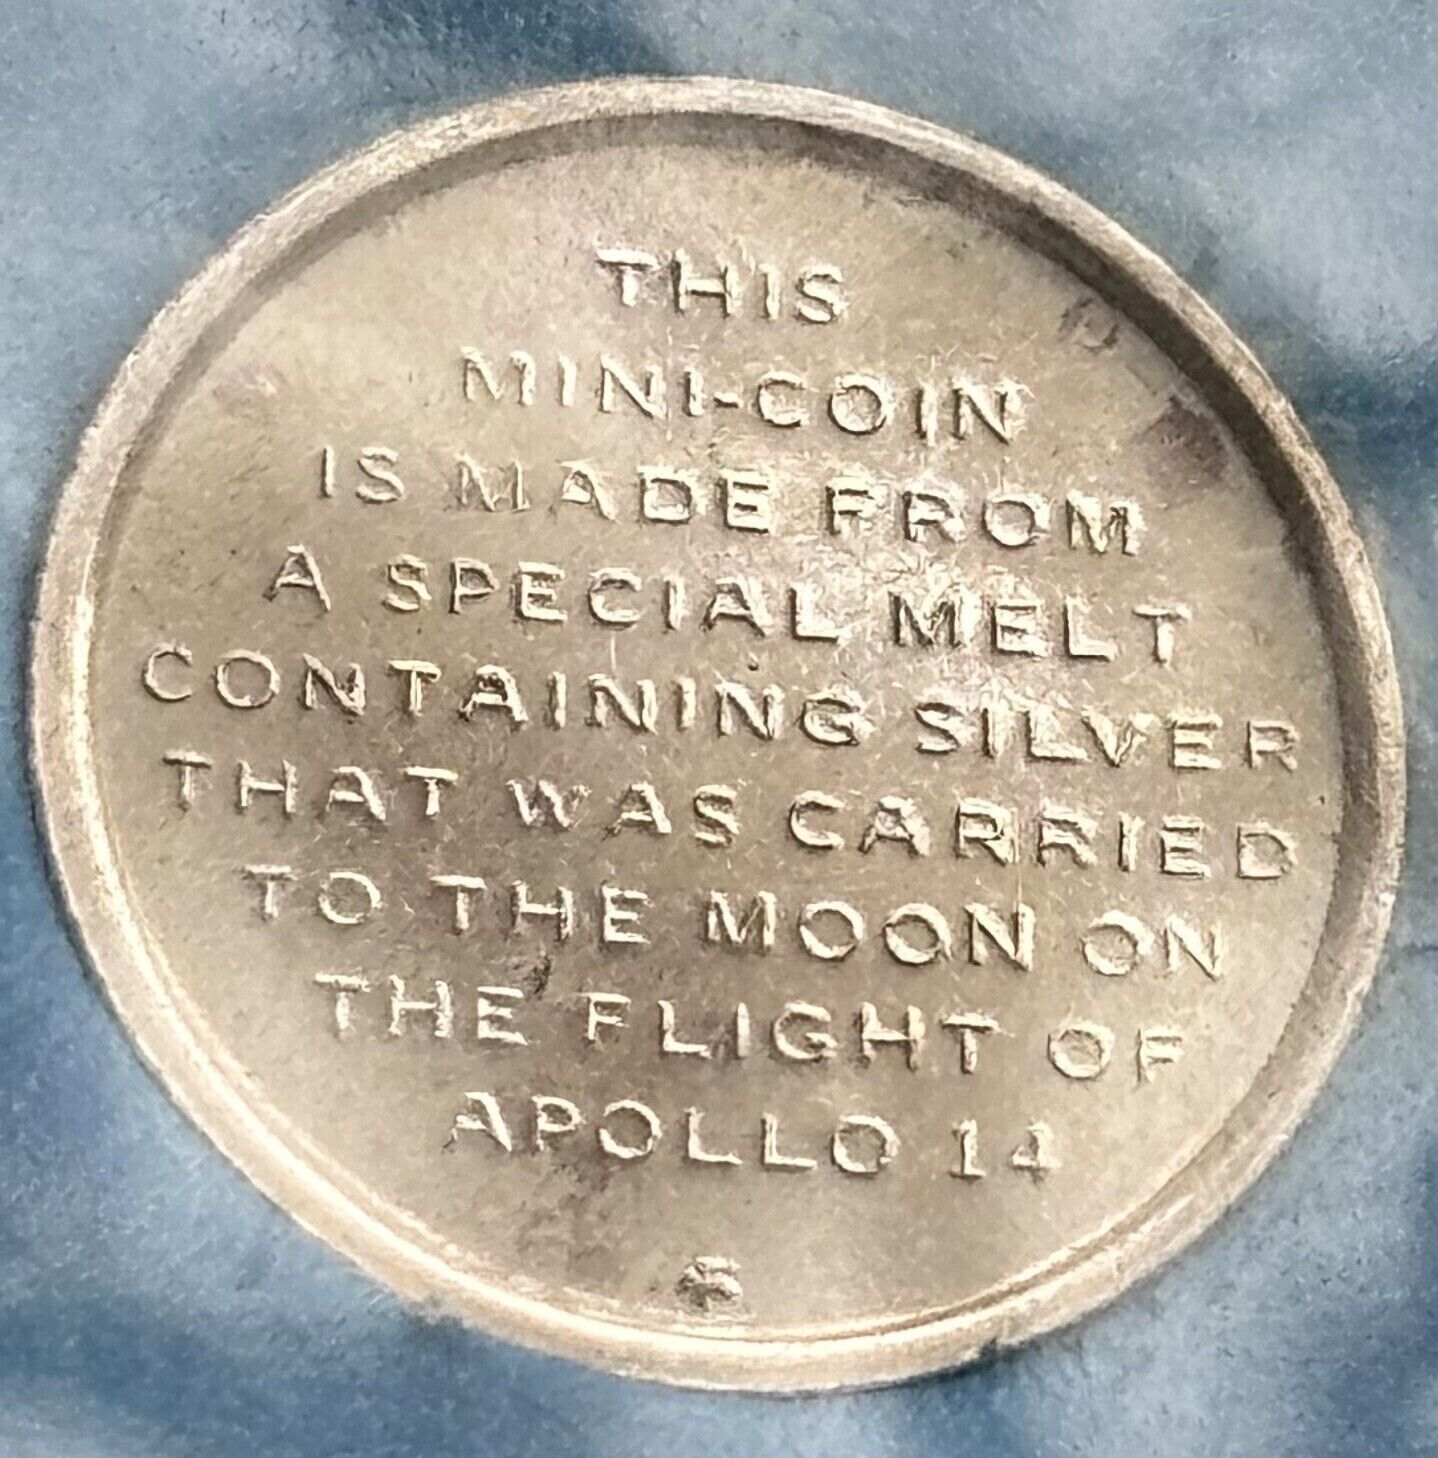 1971 Franklin Mint Apollo 14 Moon Mission Silver Mini Coin Was On The Moon